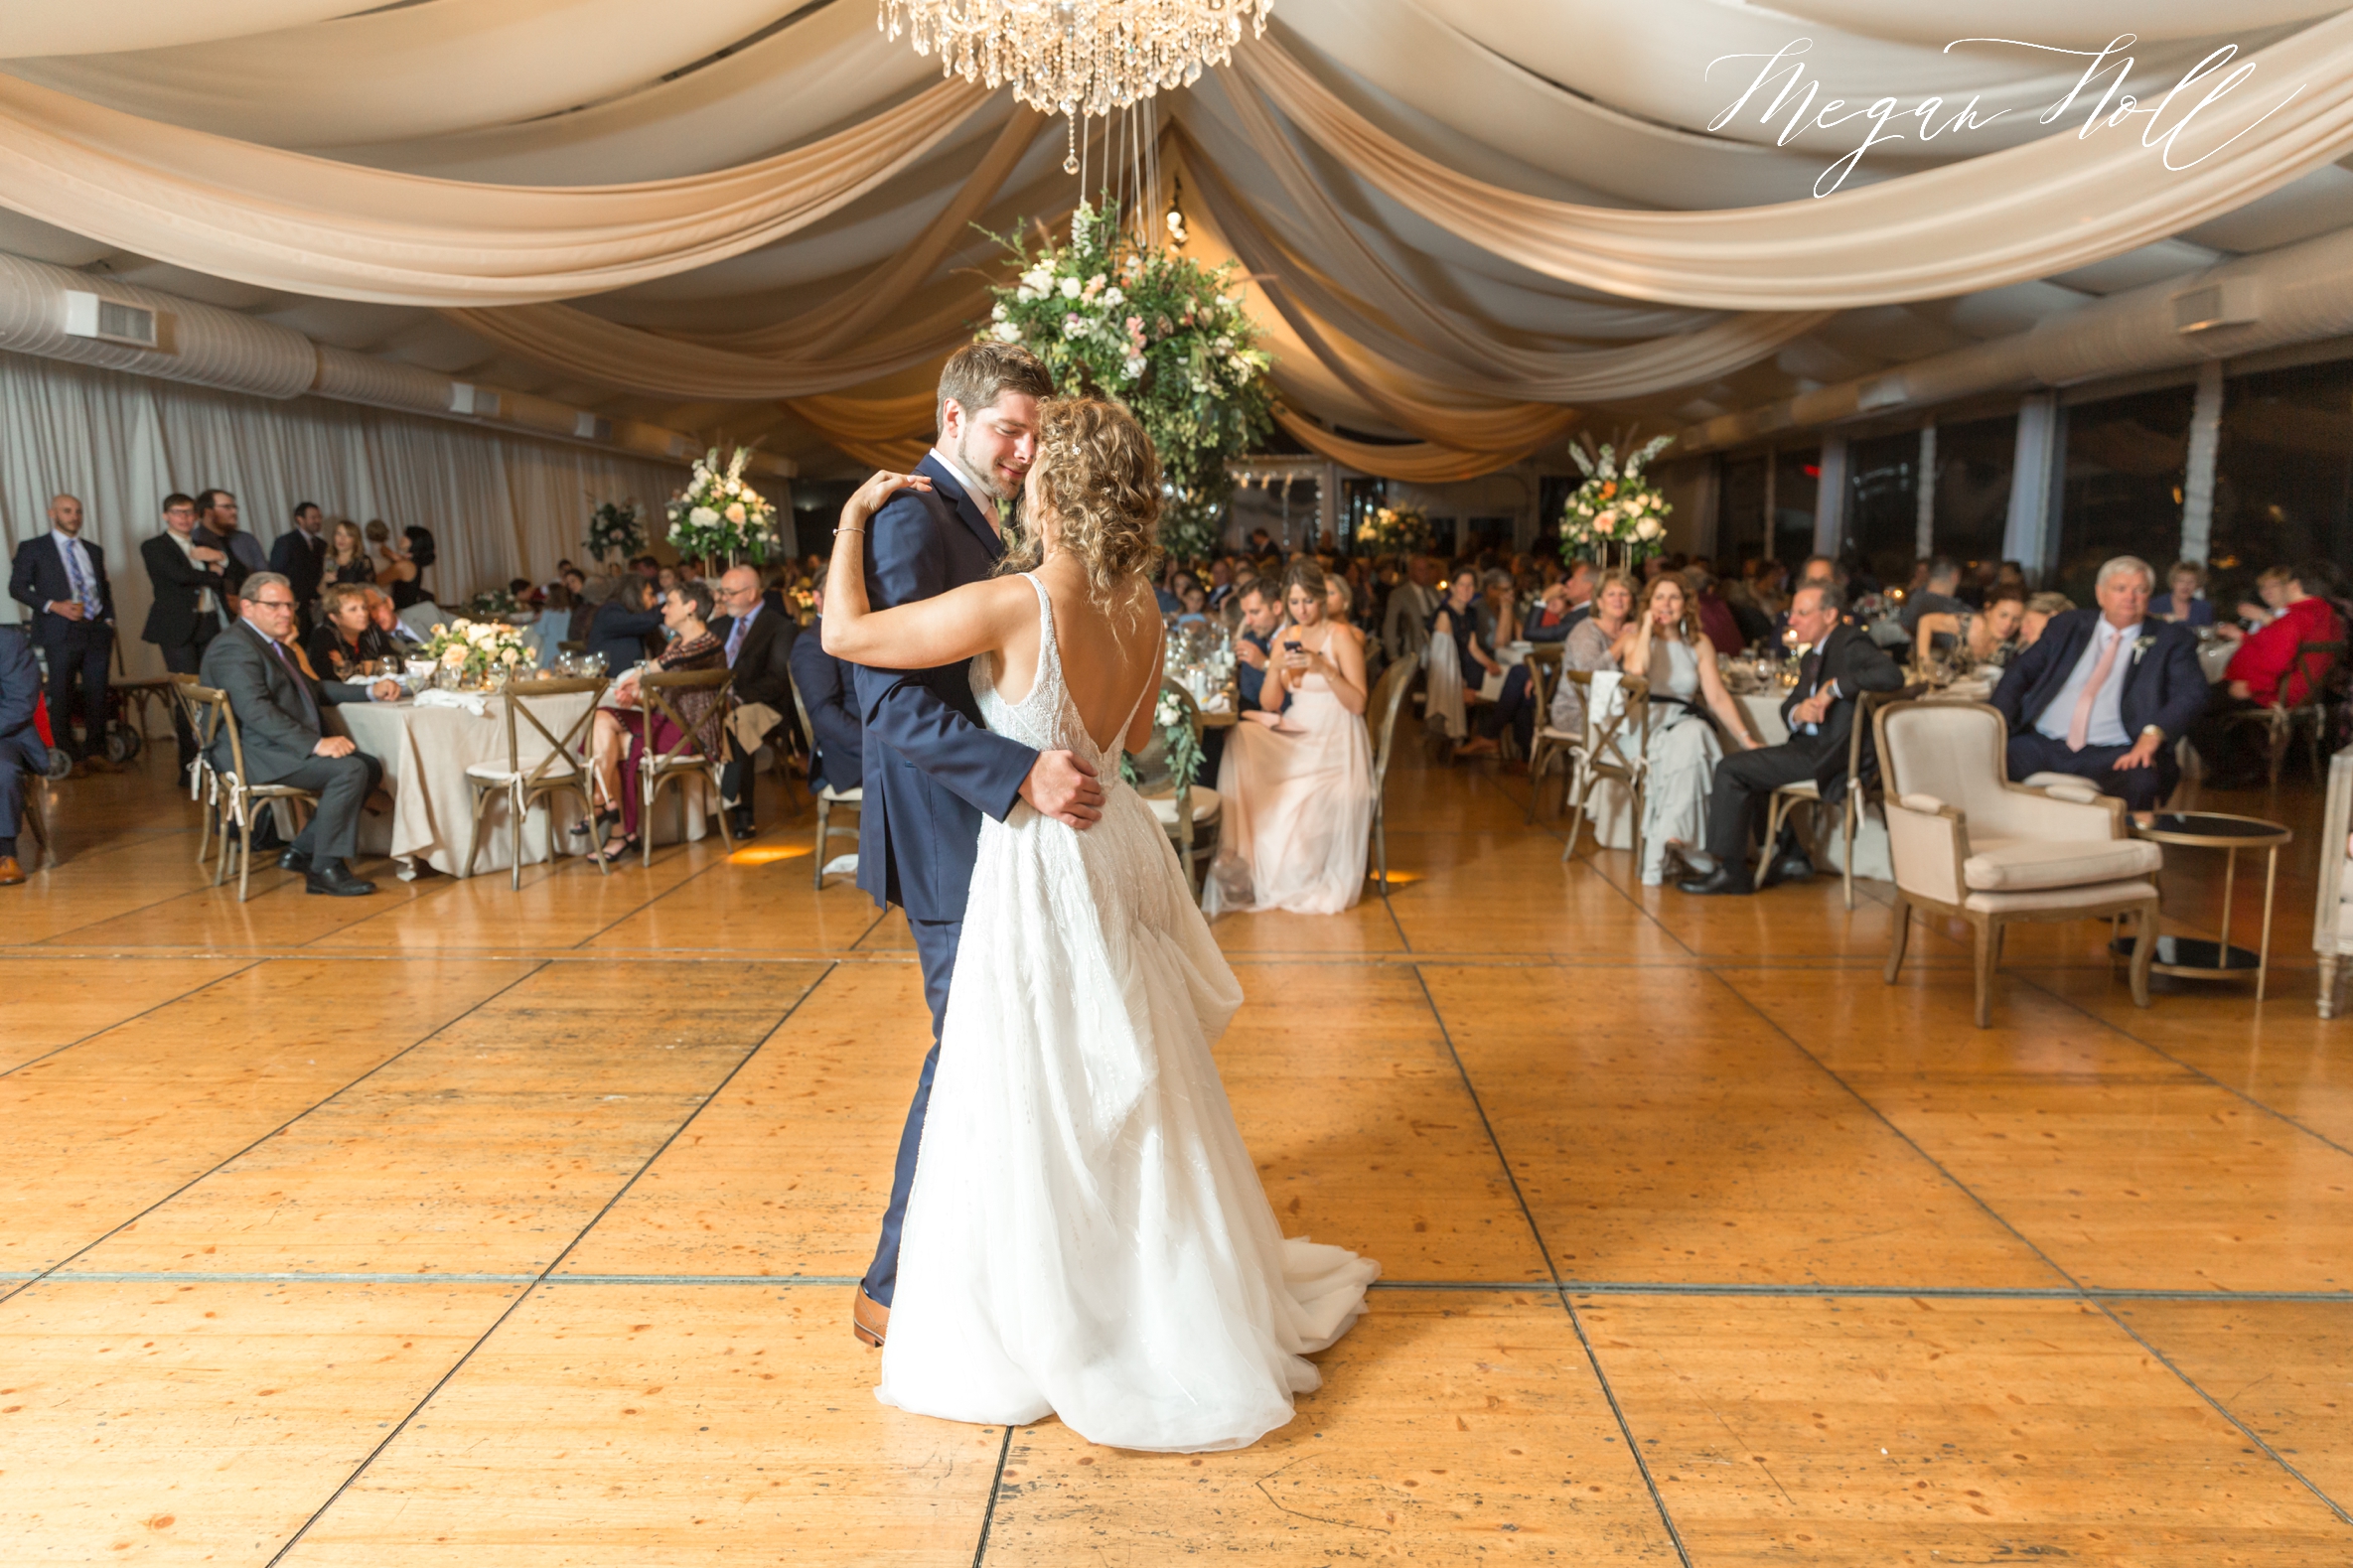 First Dance in Tent at Outdoor Wedding